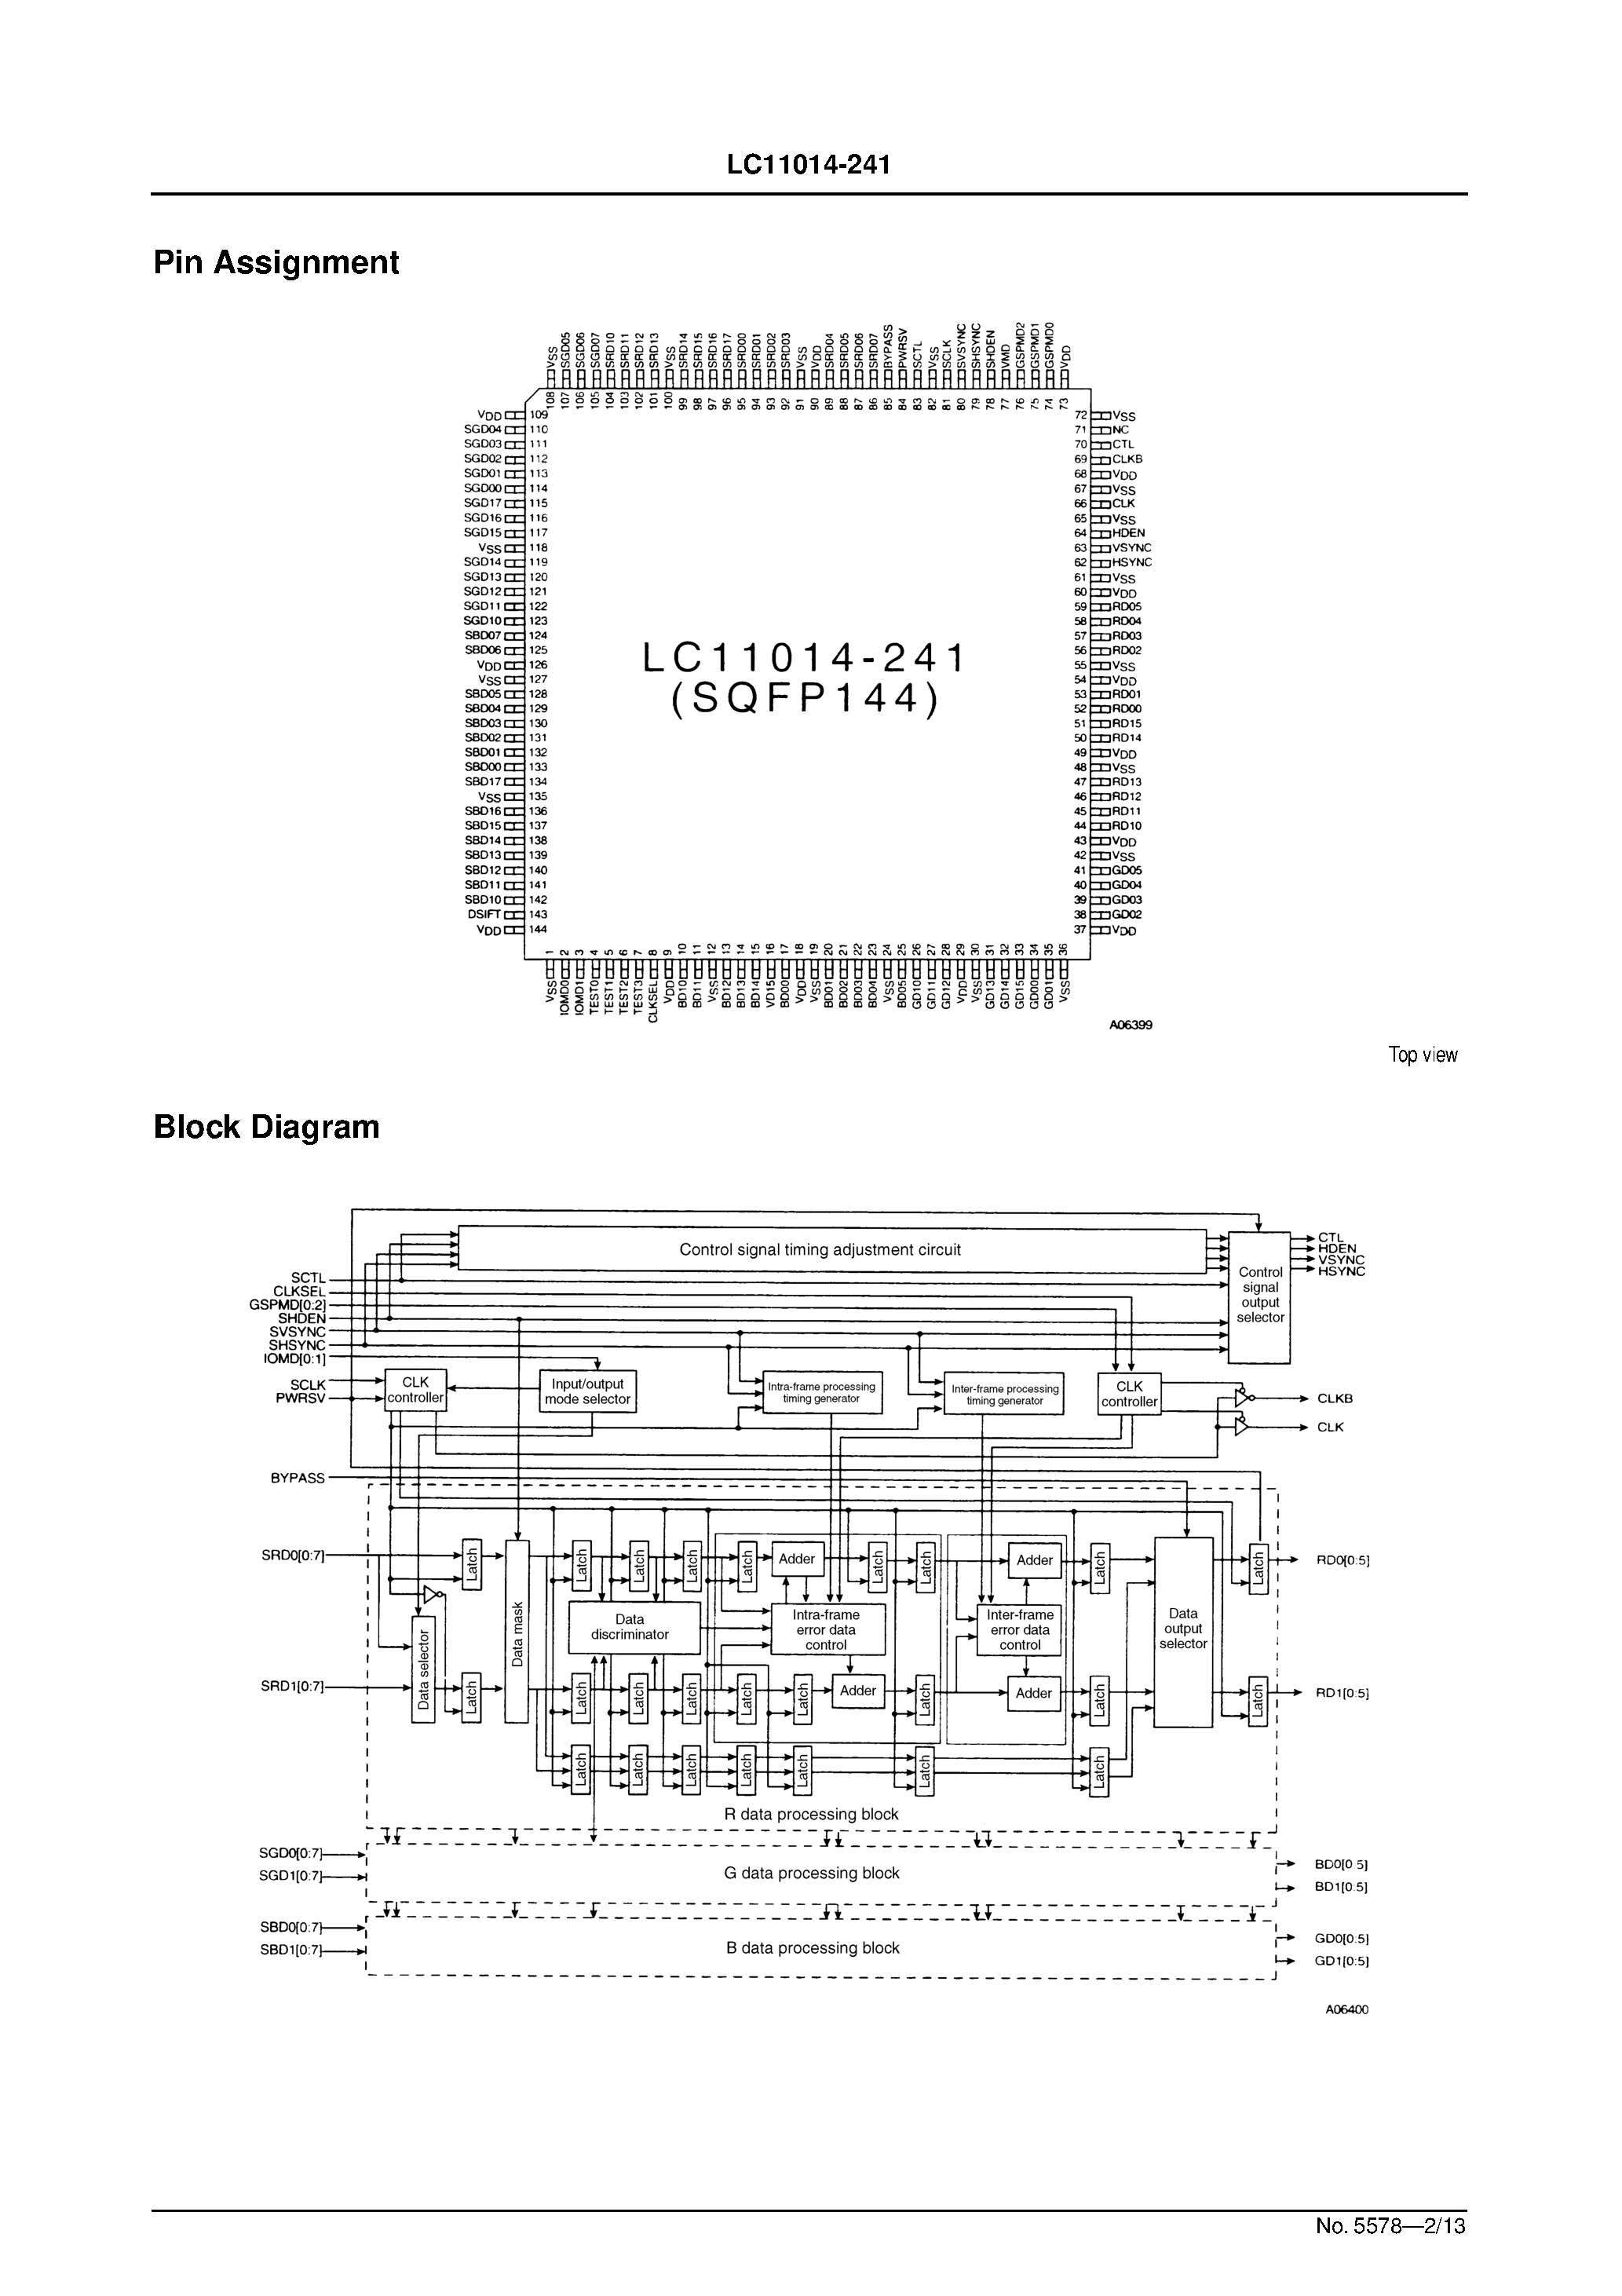 Даташит LC11014-241 - Computer Image Signal Processing Full-Color Gray-Scale Processor страница 2